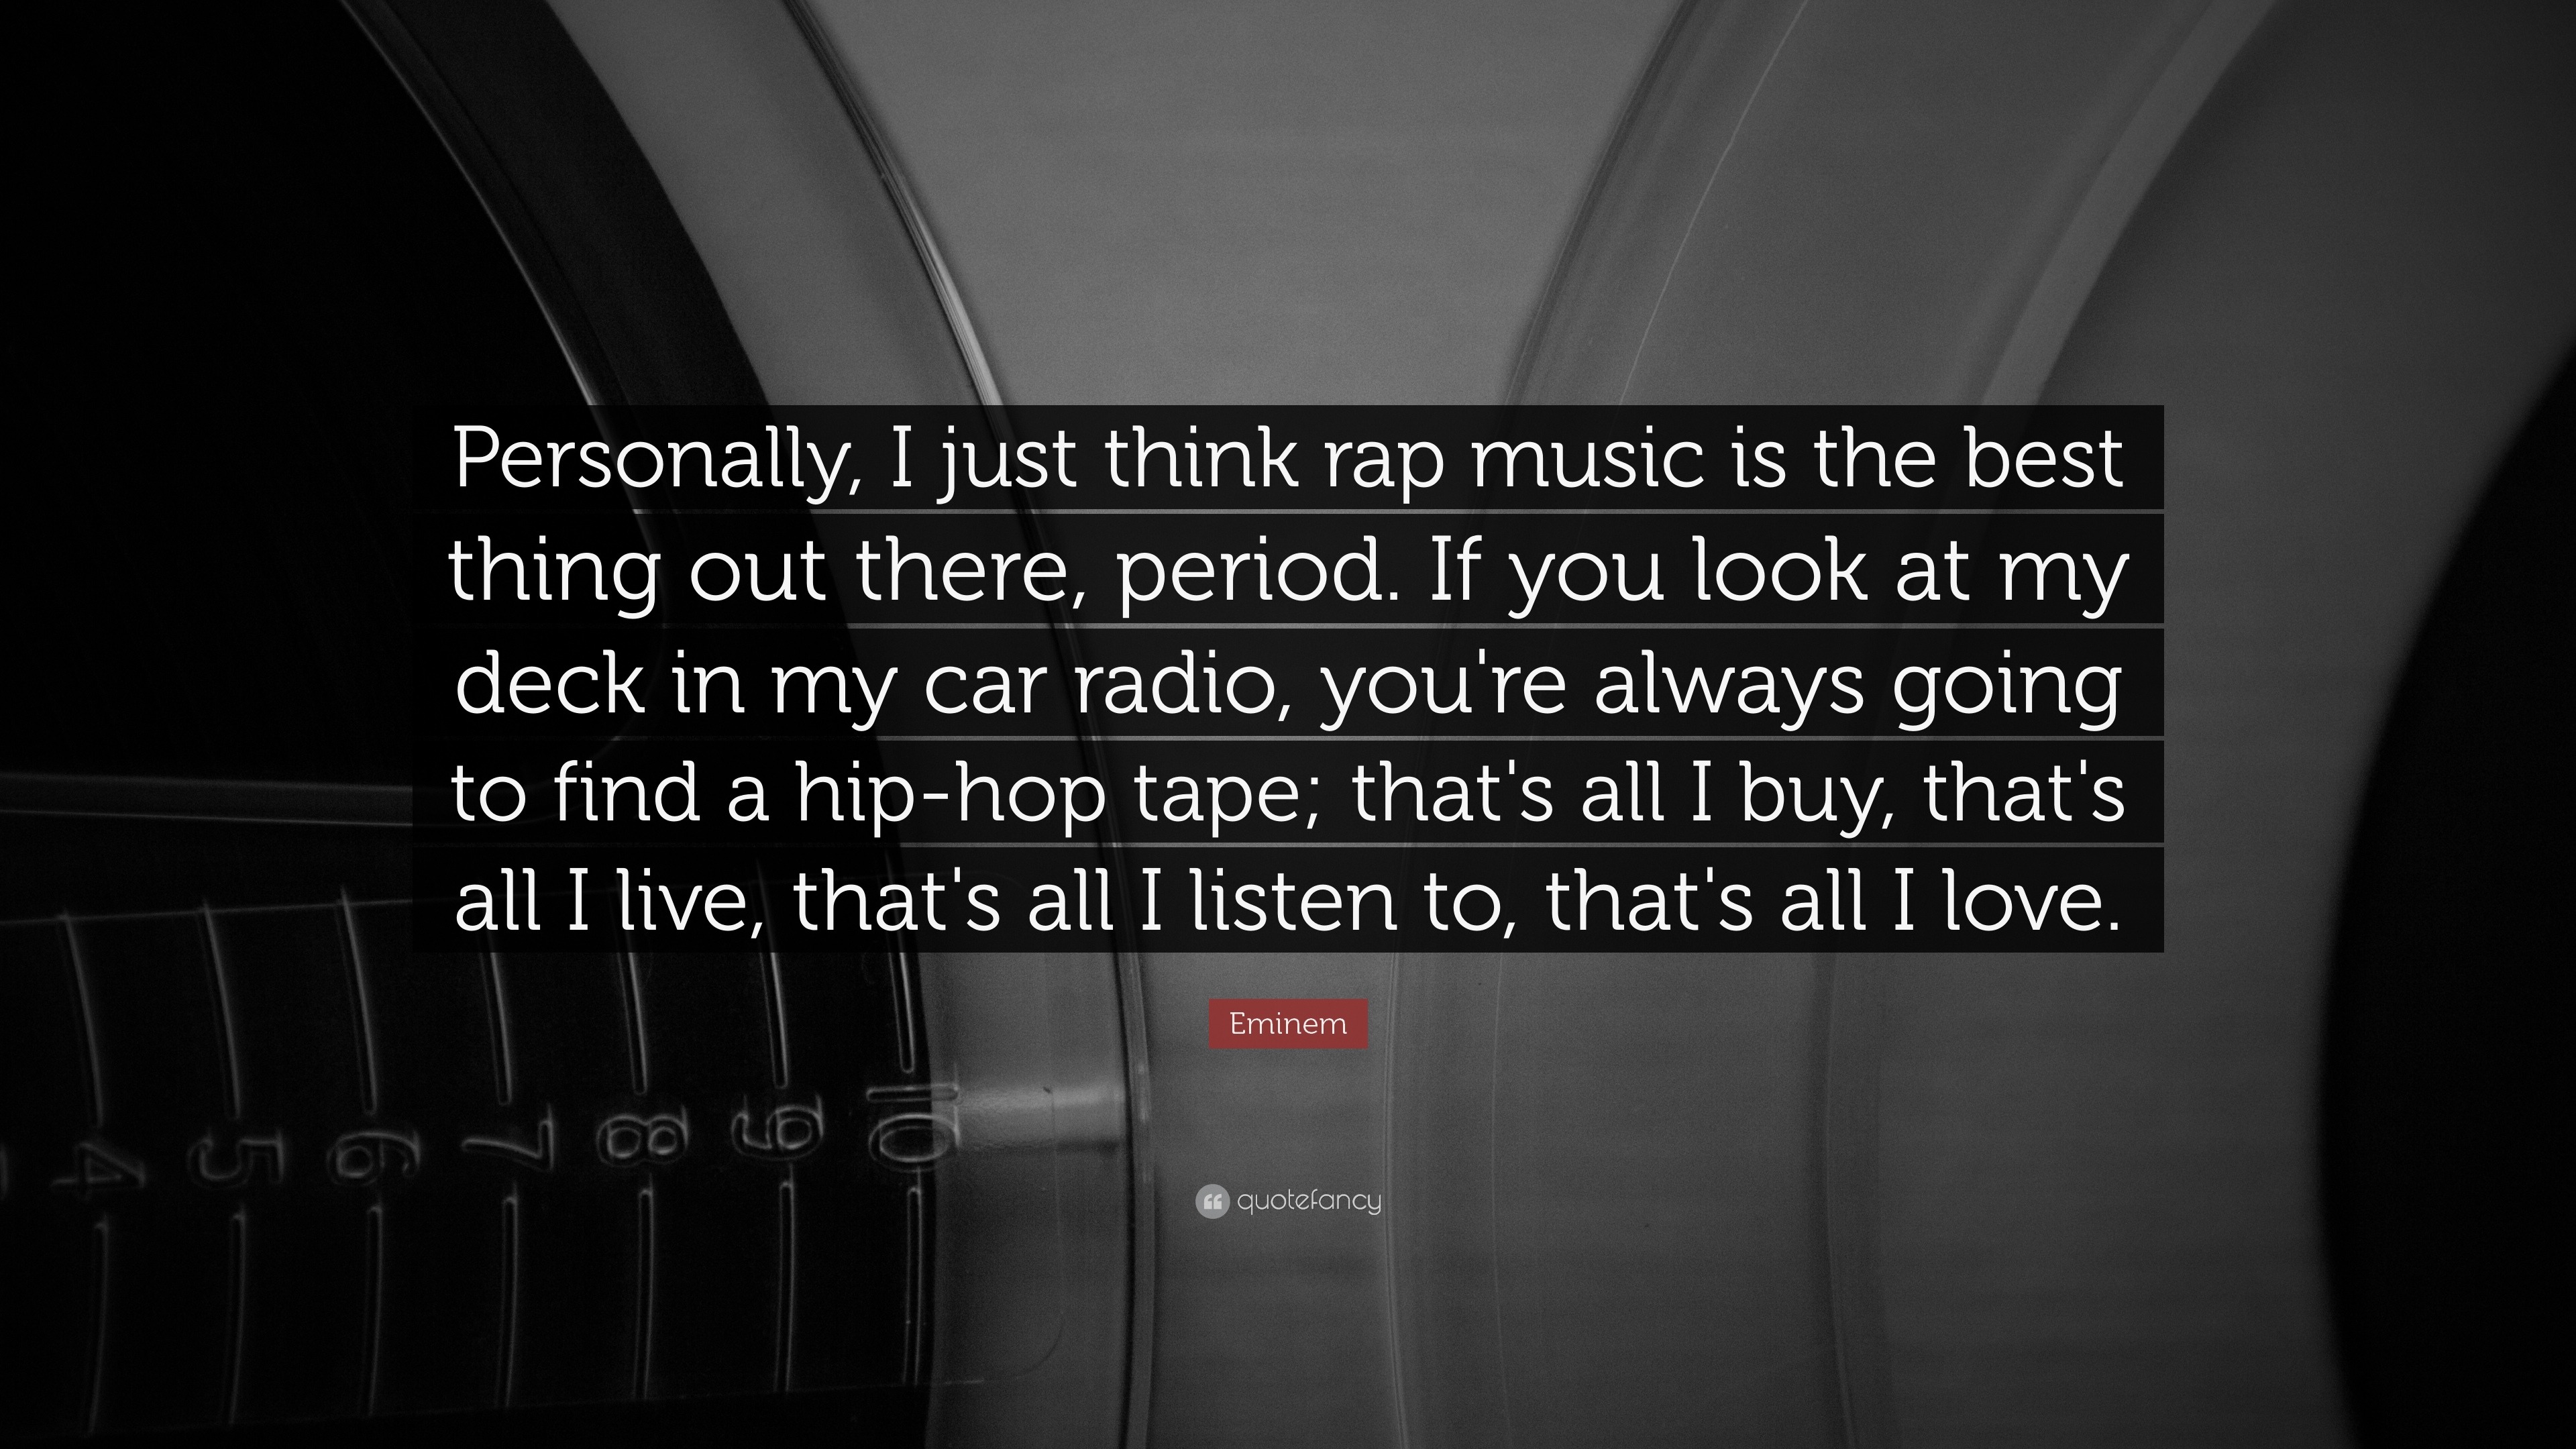 Eminem Quote “Personally I just think rap music is the best thing out